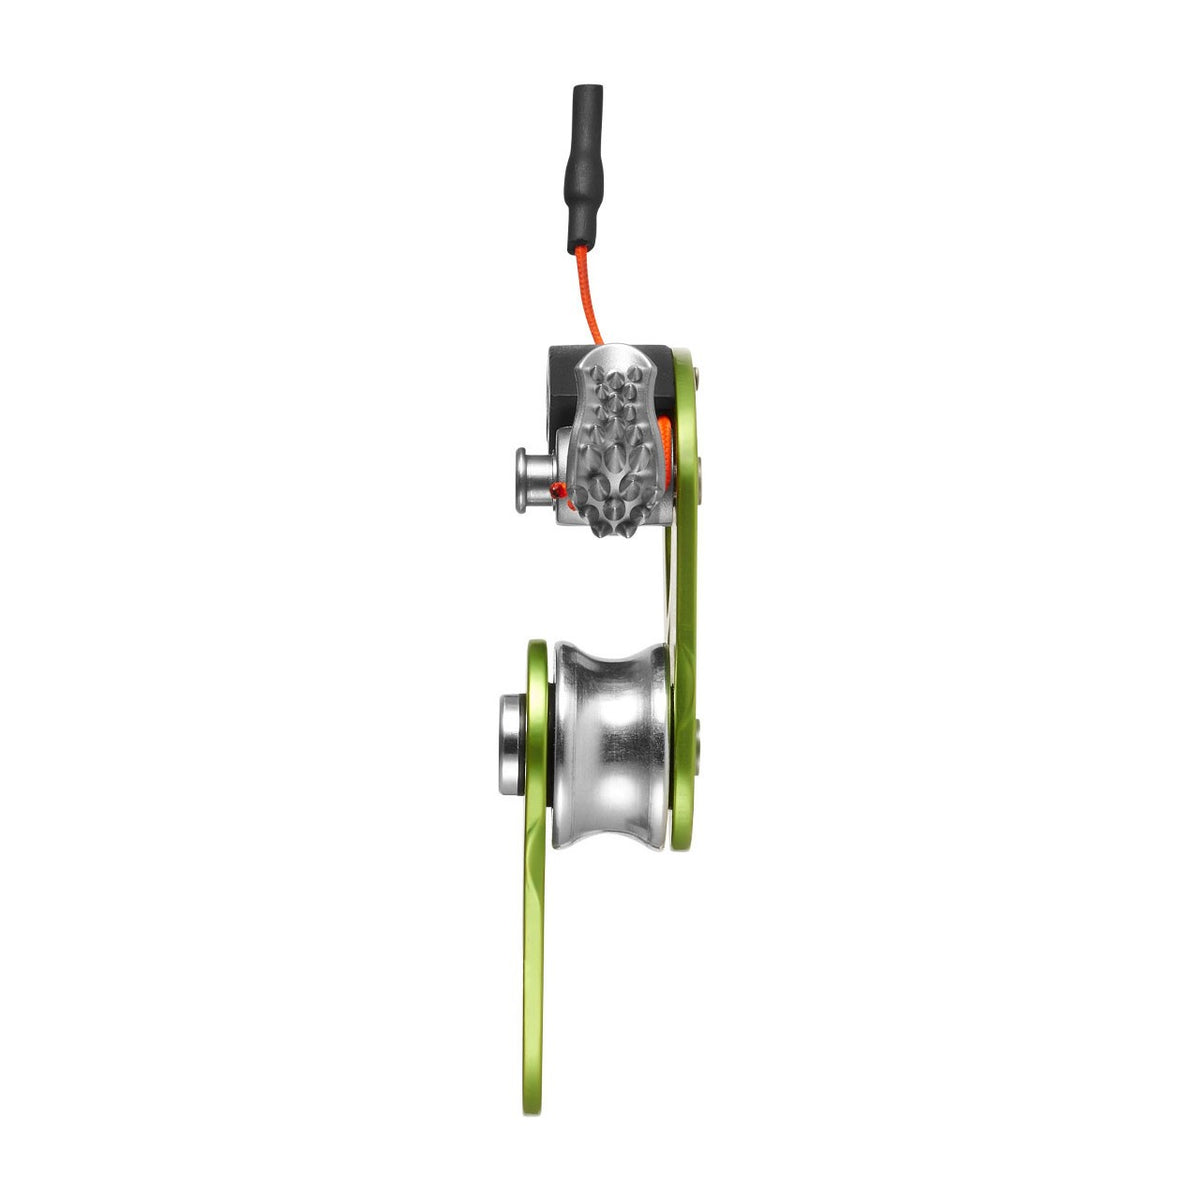 rear view of the Edelrid Spoc showing cam mechanism